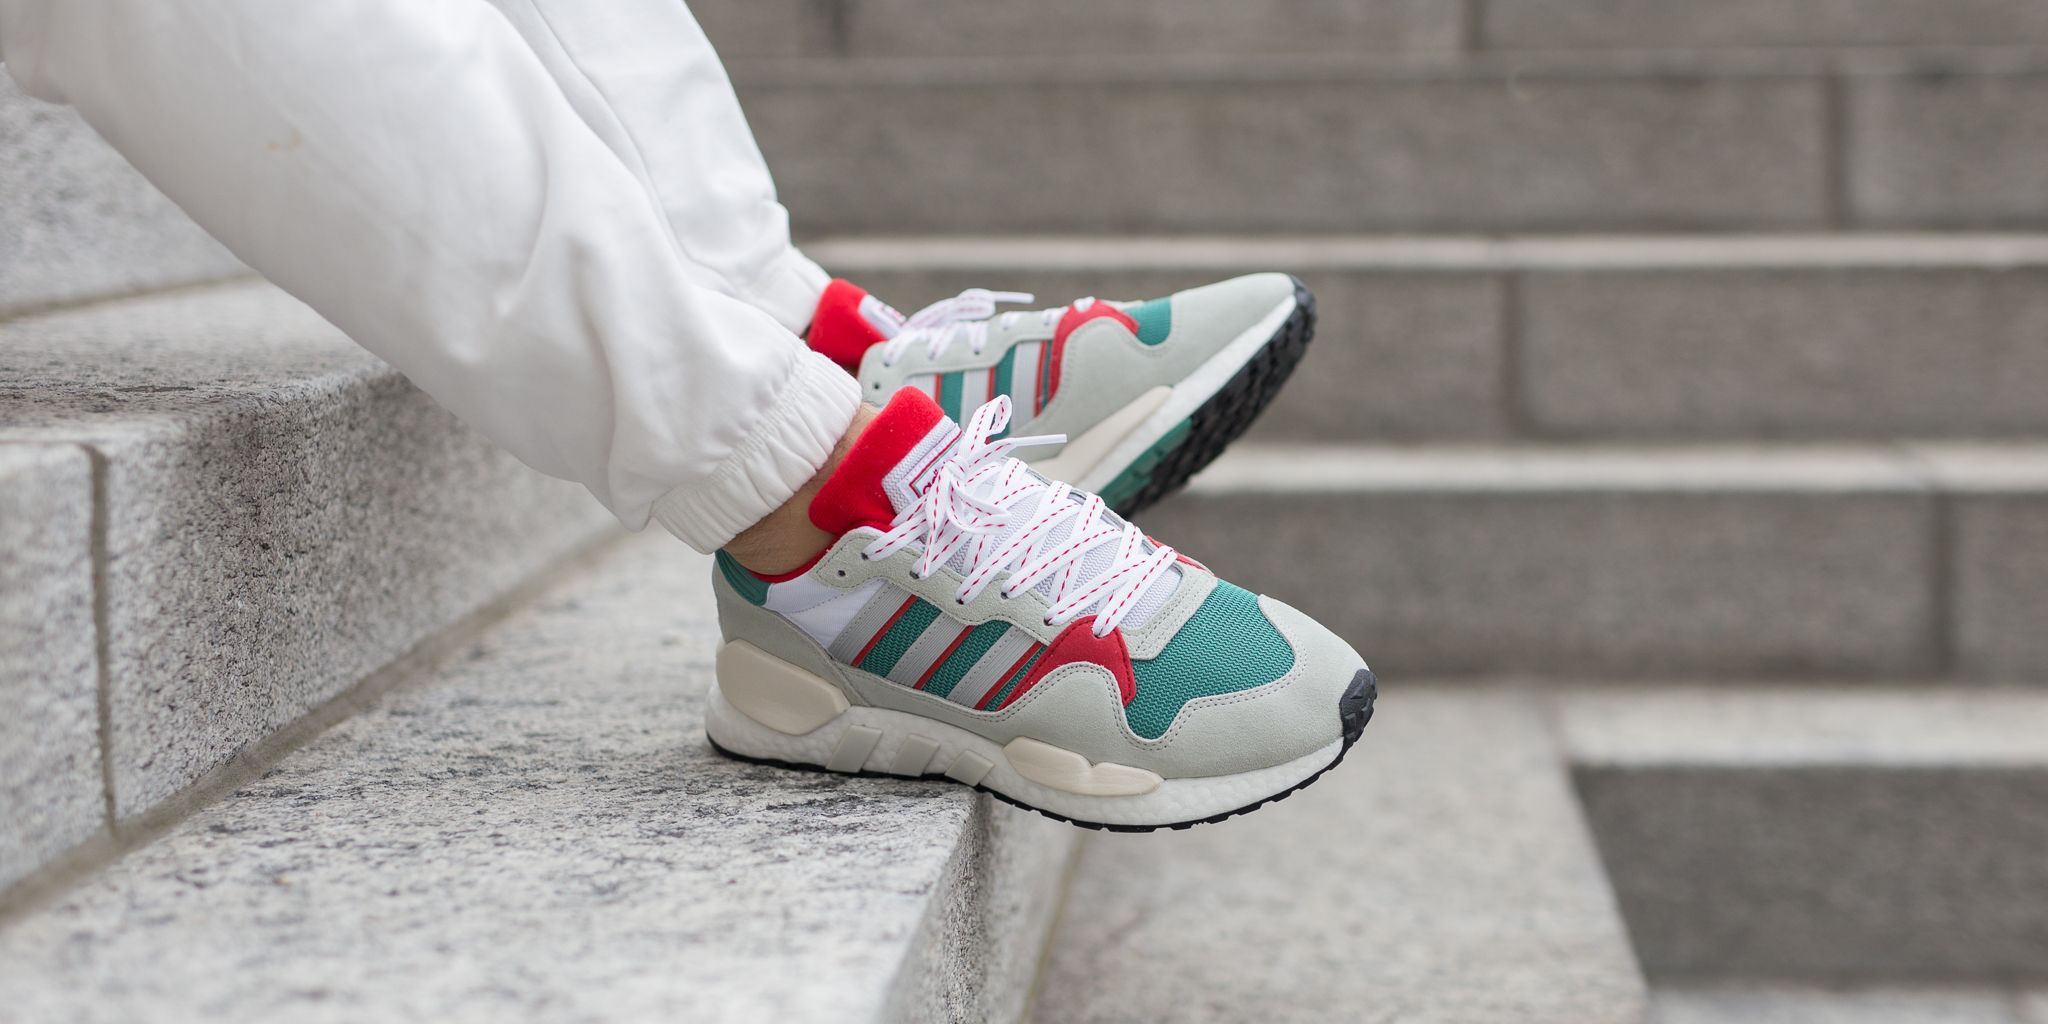 Circo Memorizar peine Titolo on Twitter: "Adidas ZX 930 x EQT 🔹Never Made Pack 🔹 dropping  tonight Wednesday, 17th October 🔹0.00AM CET this way please ➡️  https://t.co/jn7JN7tBLA #adidas #adidasoriginals #nevermade #zx930 #eqt # micropacer #r1 #boston #